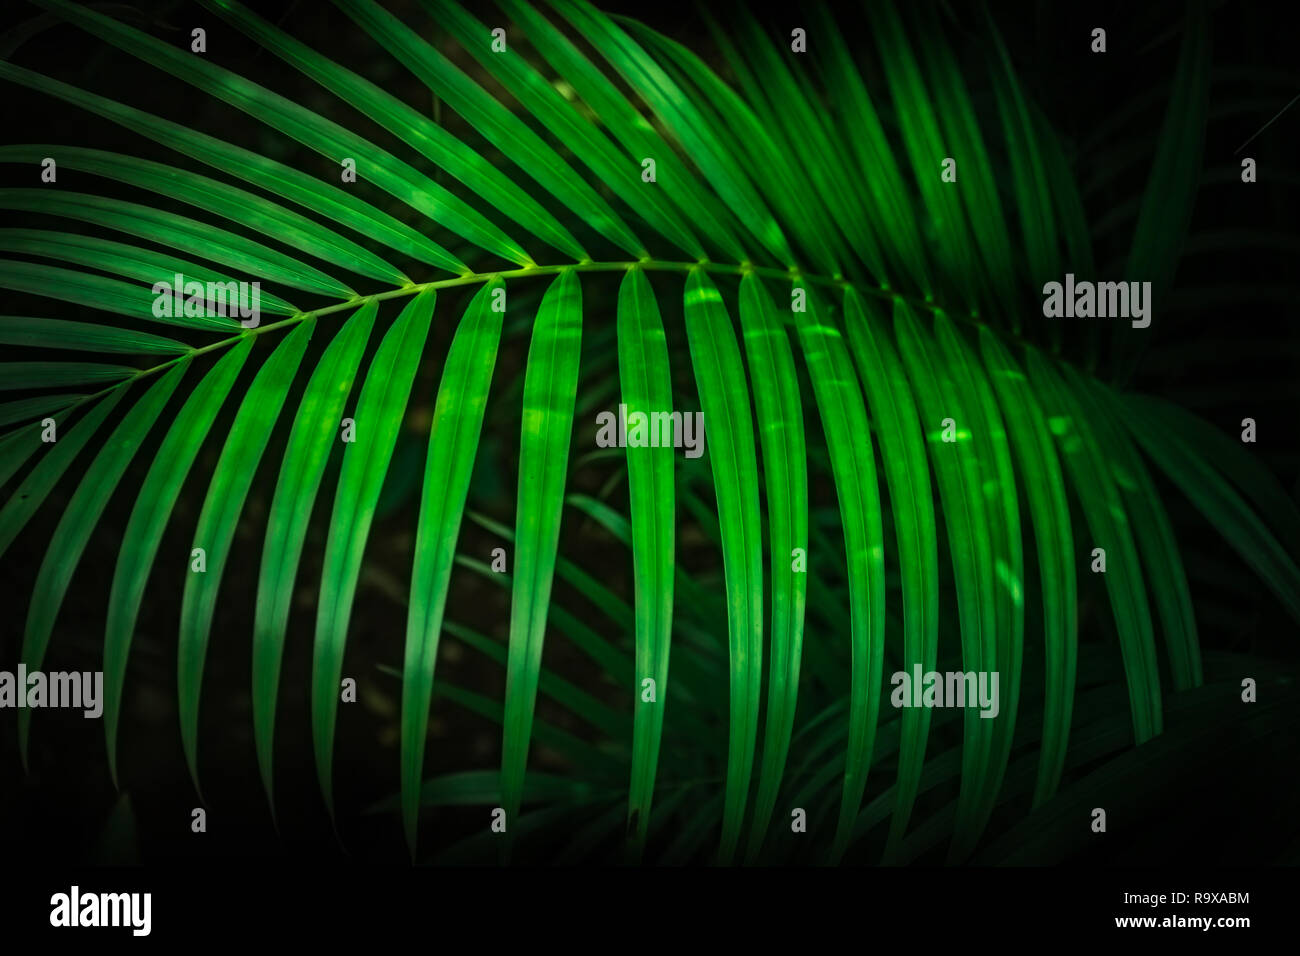 Green tropical palm leaves, dark green background. Stock Photo